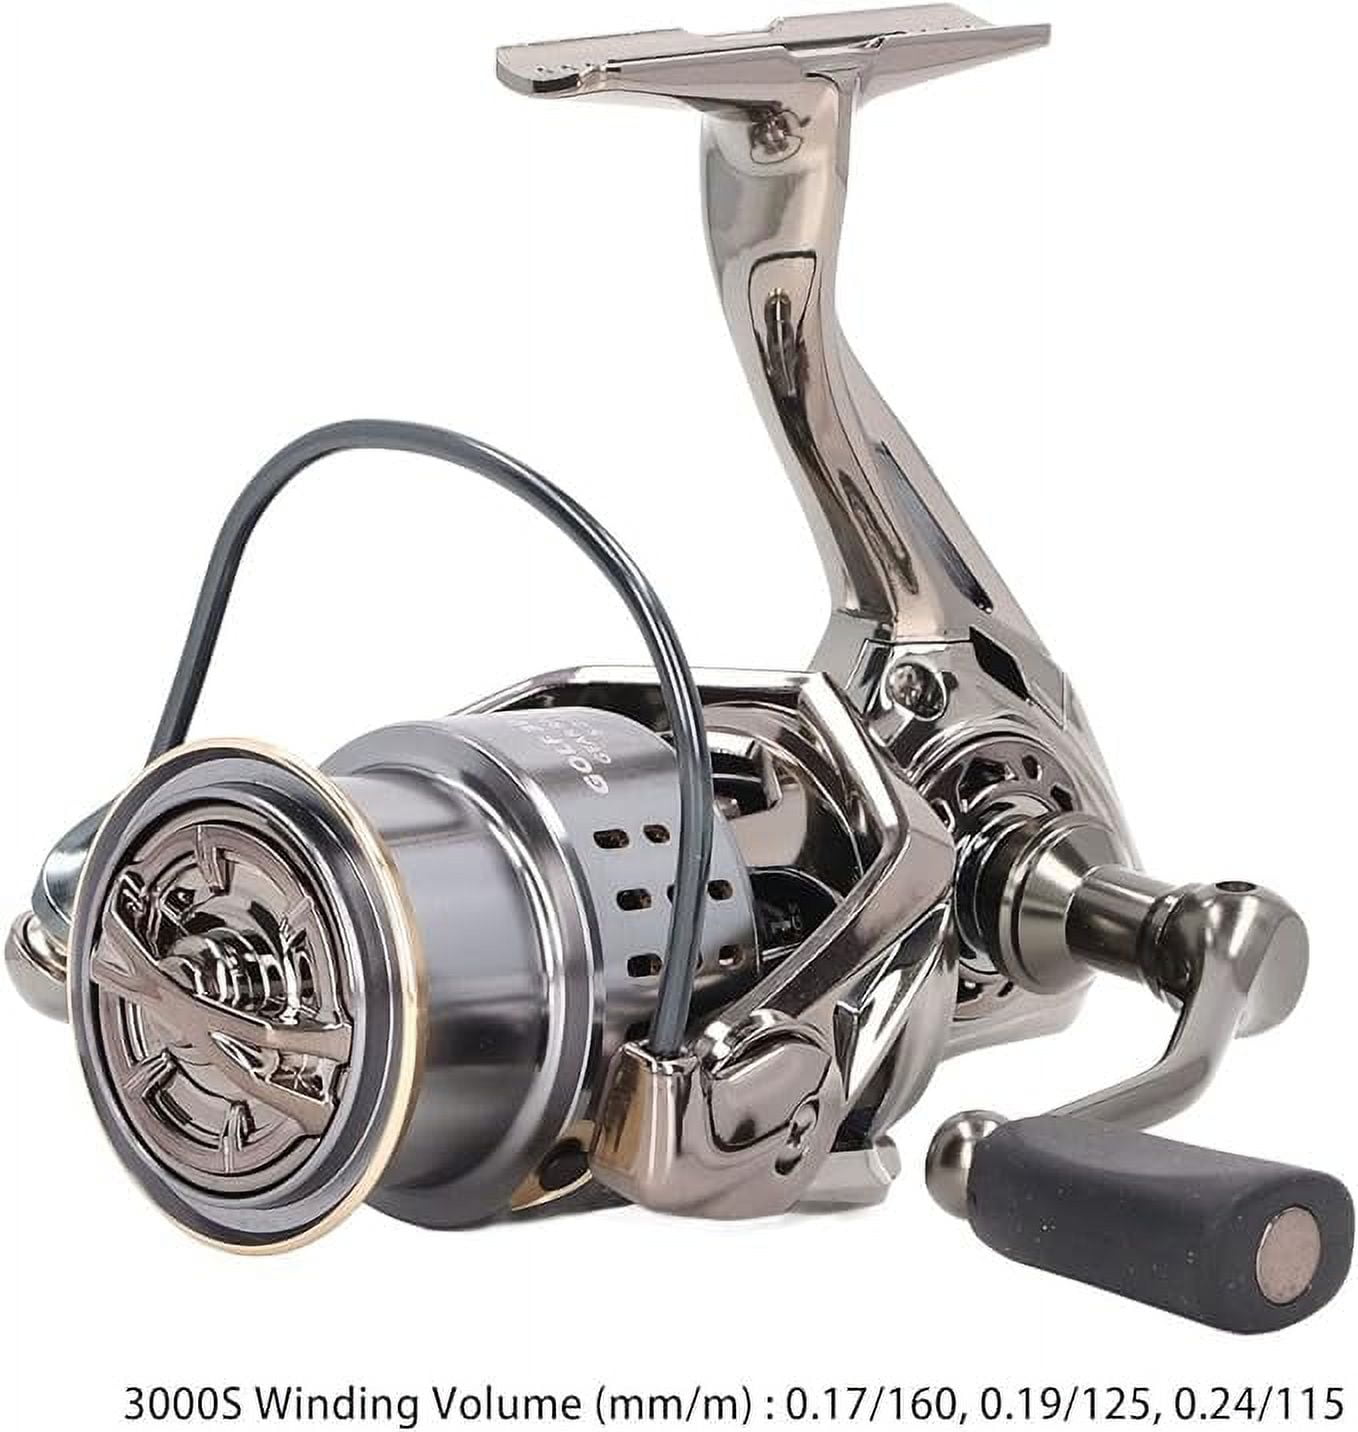 Spinning Reel, Smooth Fresh and Saltwater Fishing Reel, CNC Machined Sealed  Body, for Bass Catfish Crappie Trout, Spinning Fishing Reel 1000-7000